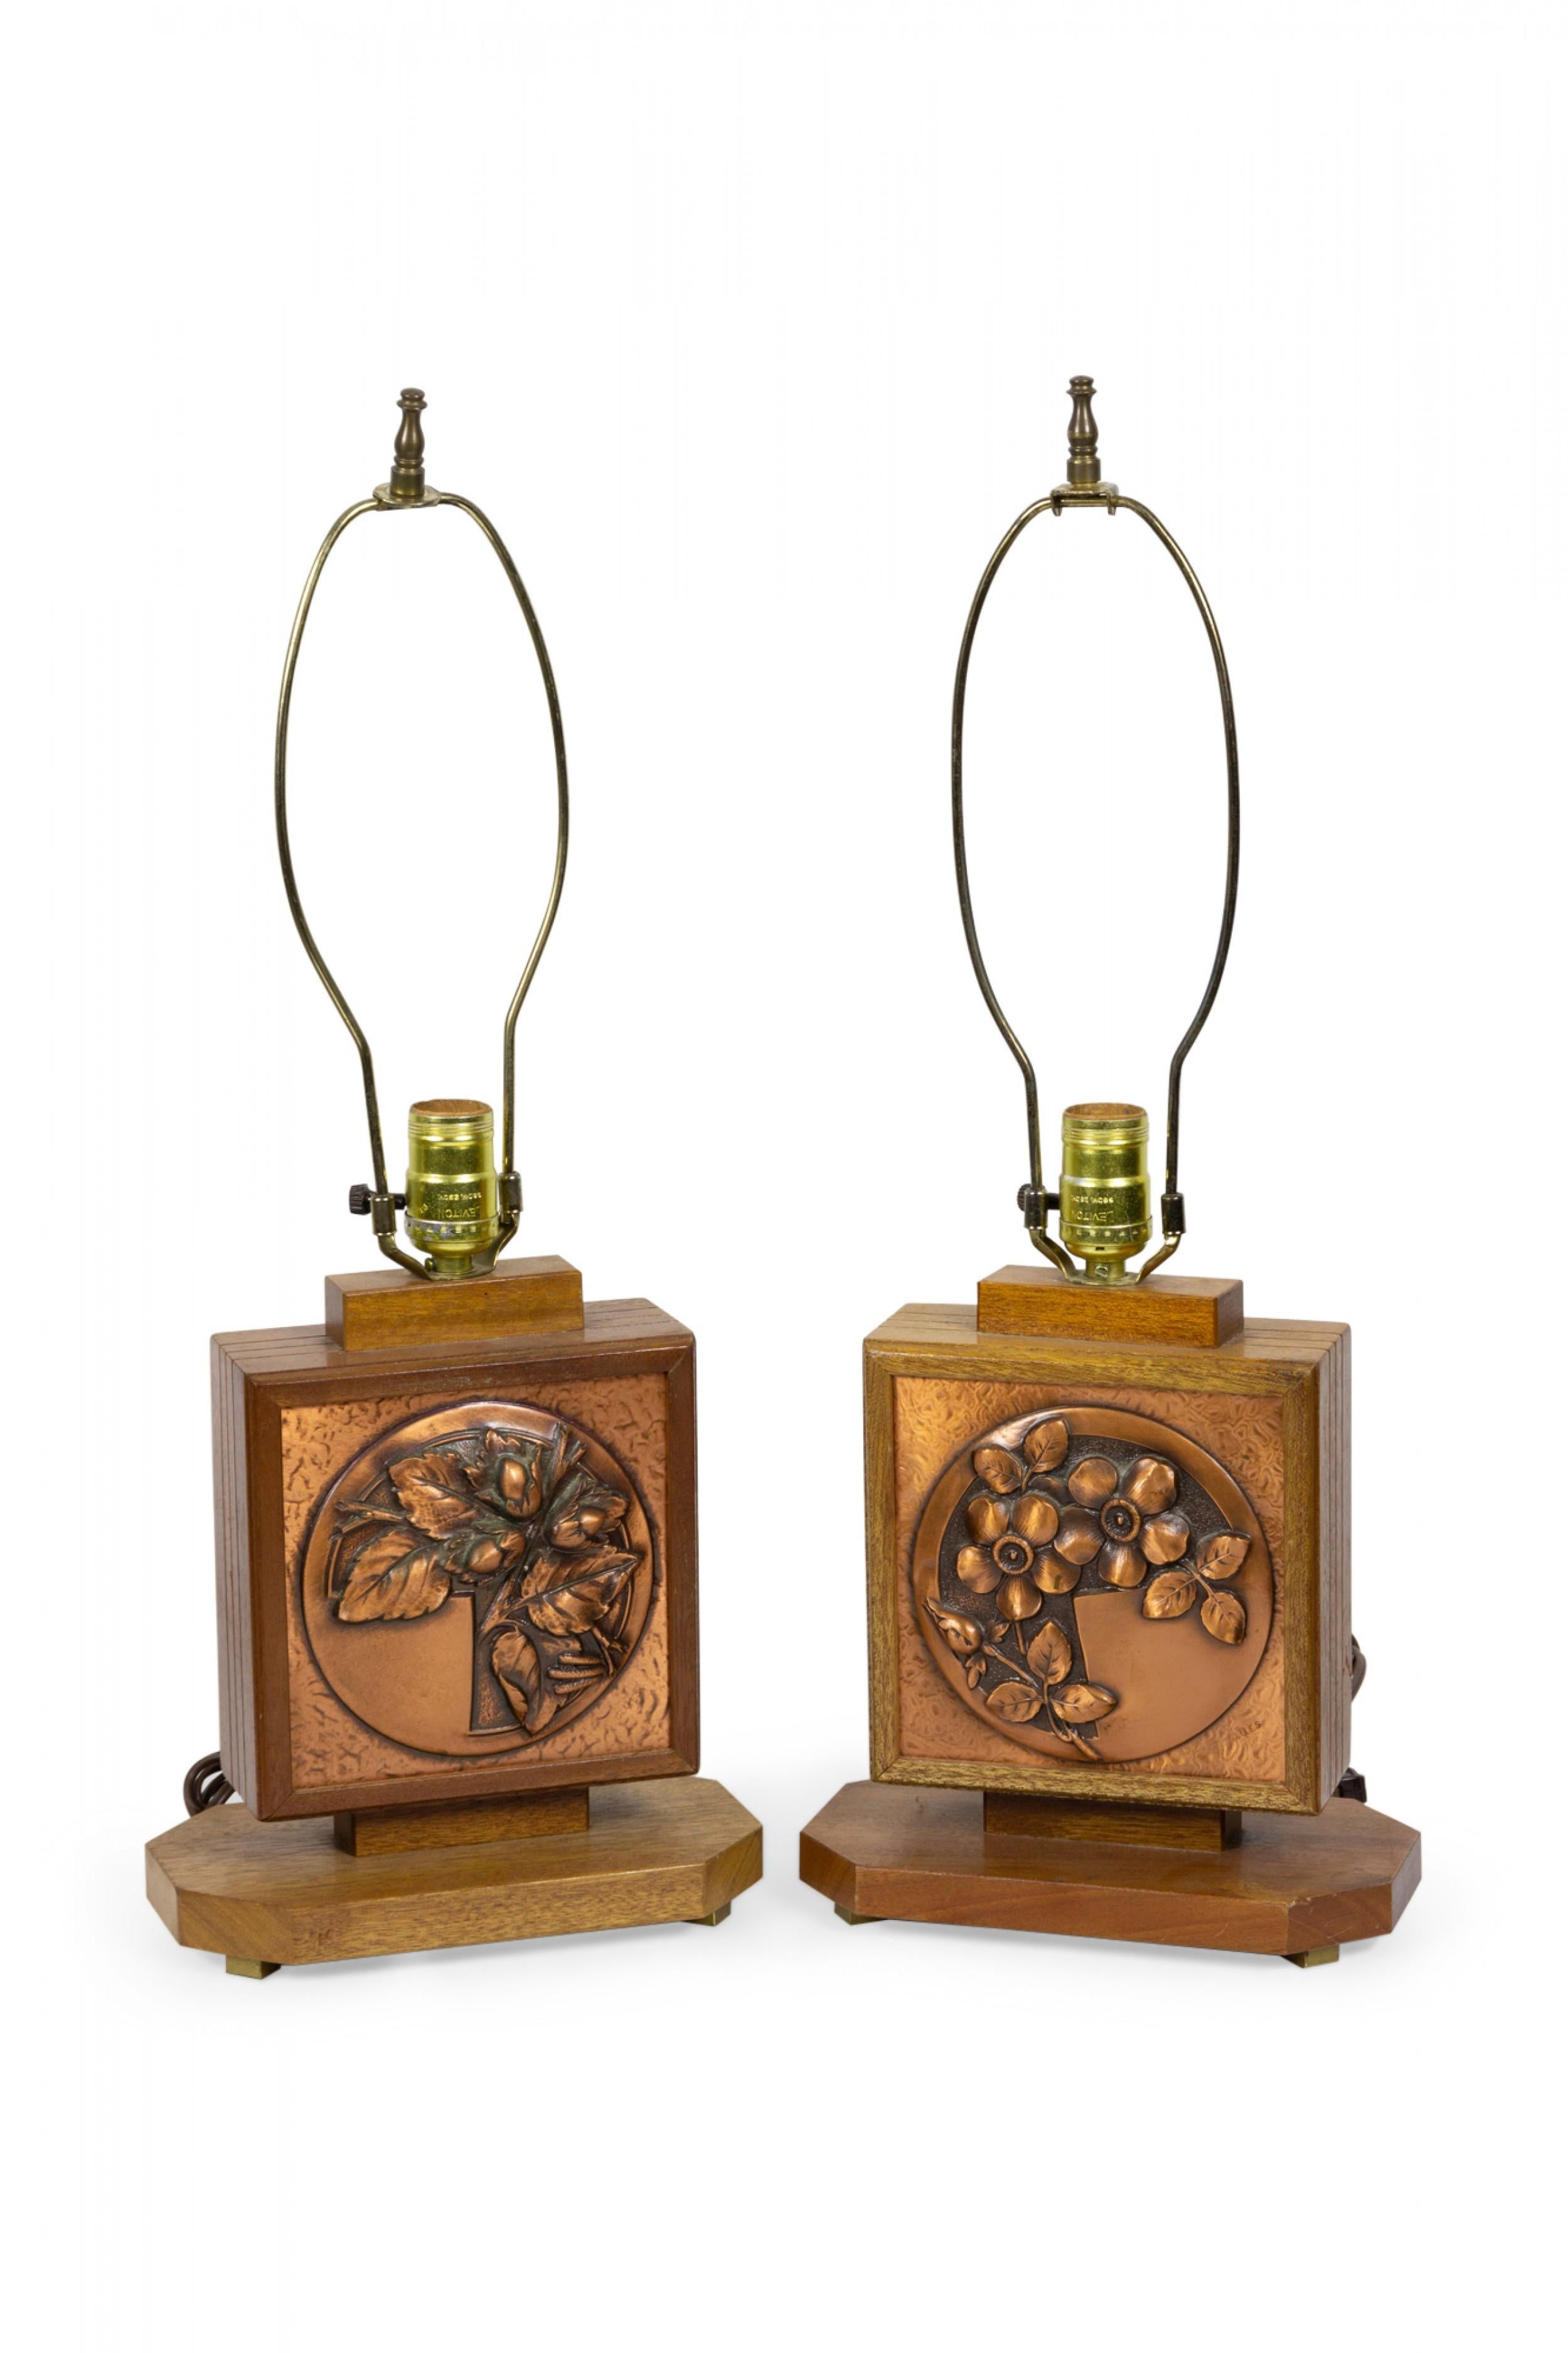 Pair of French Art Deco table lamps with embossed copper plates on either side, one with a floral design, one with an oak leaf and acorn design, mounted in wooden frames having square parchment shades connected with embossed copper. (Albert Gilles).